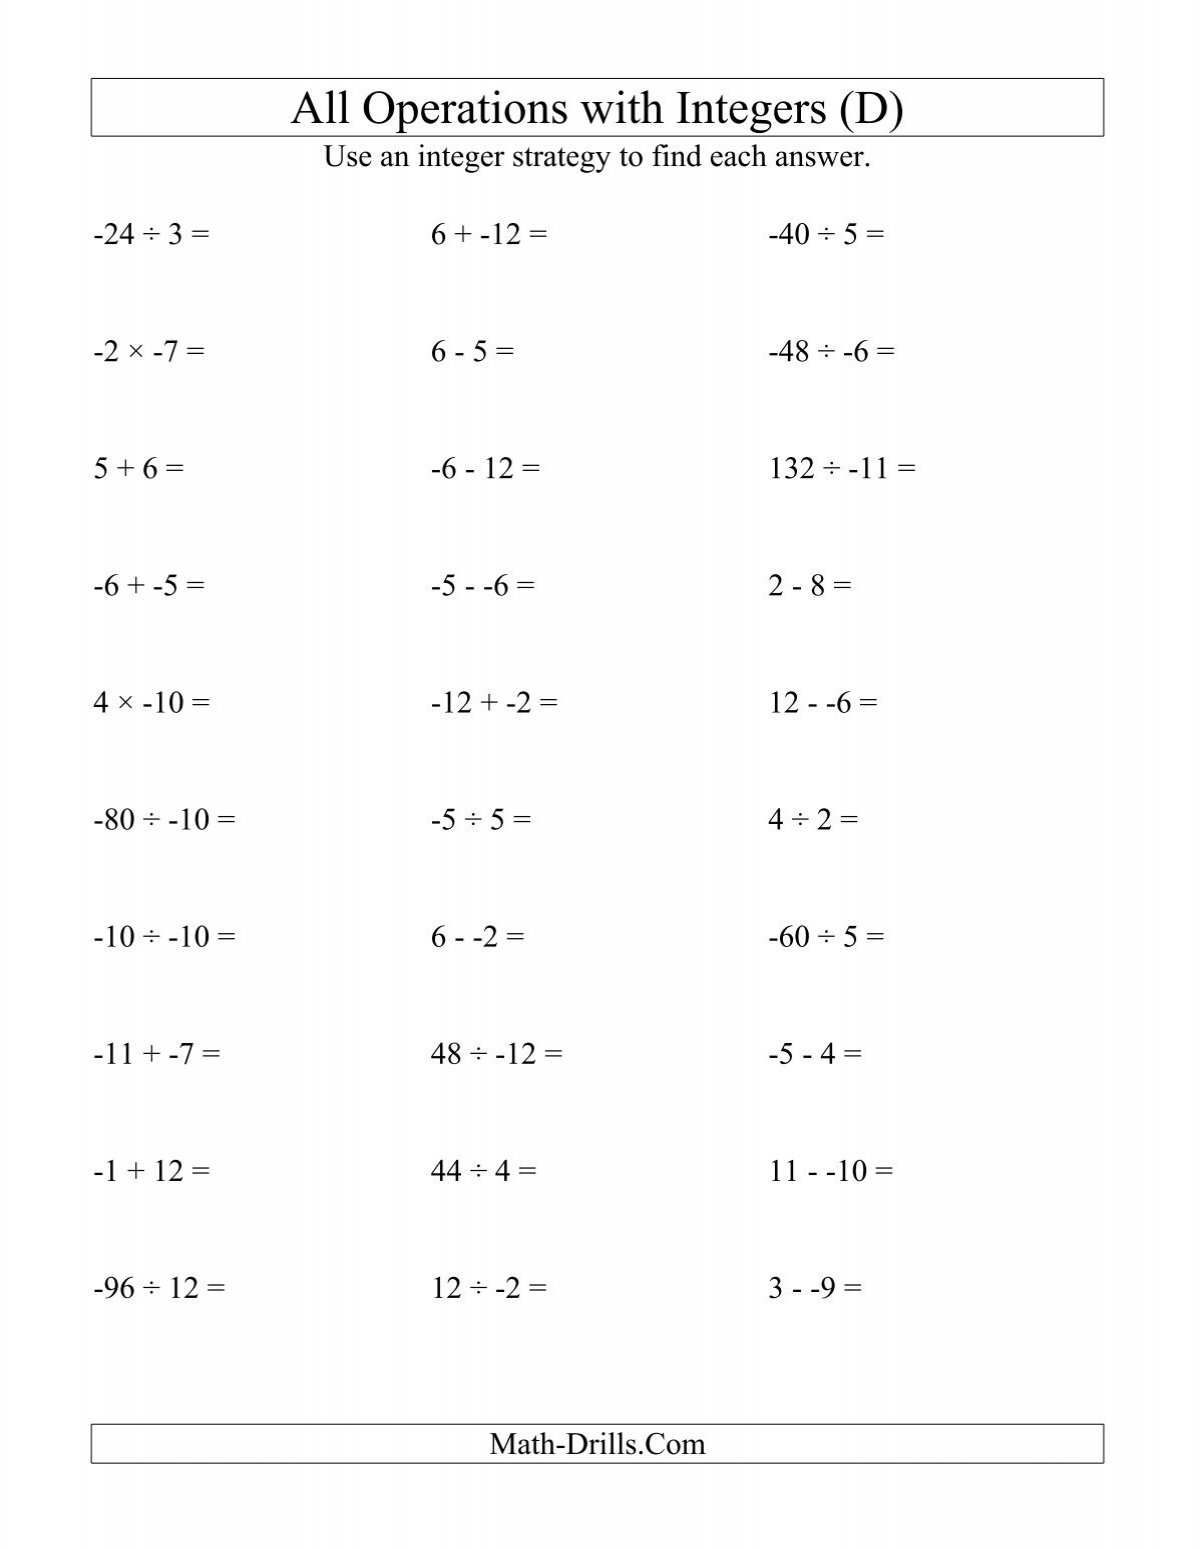 Integers Worksheet All Operations with Integers (Range 12 to 12